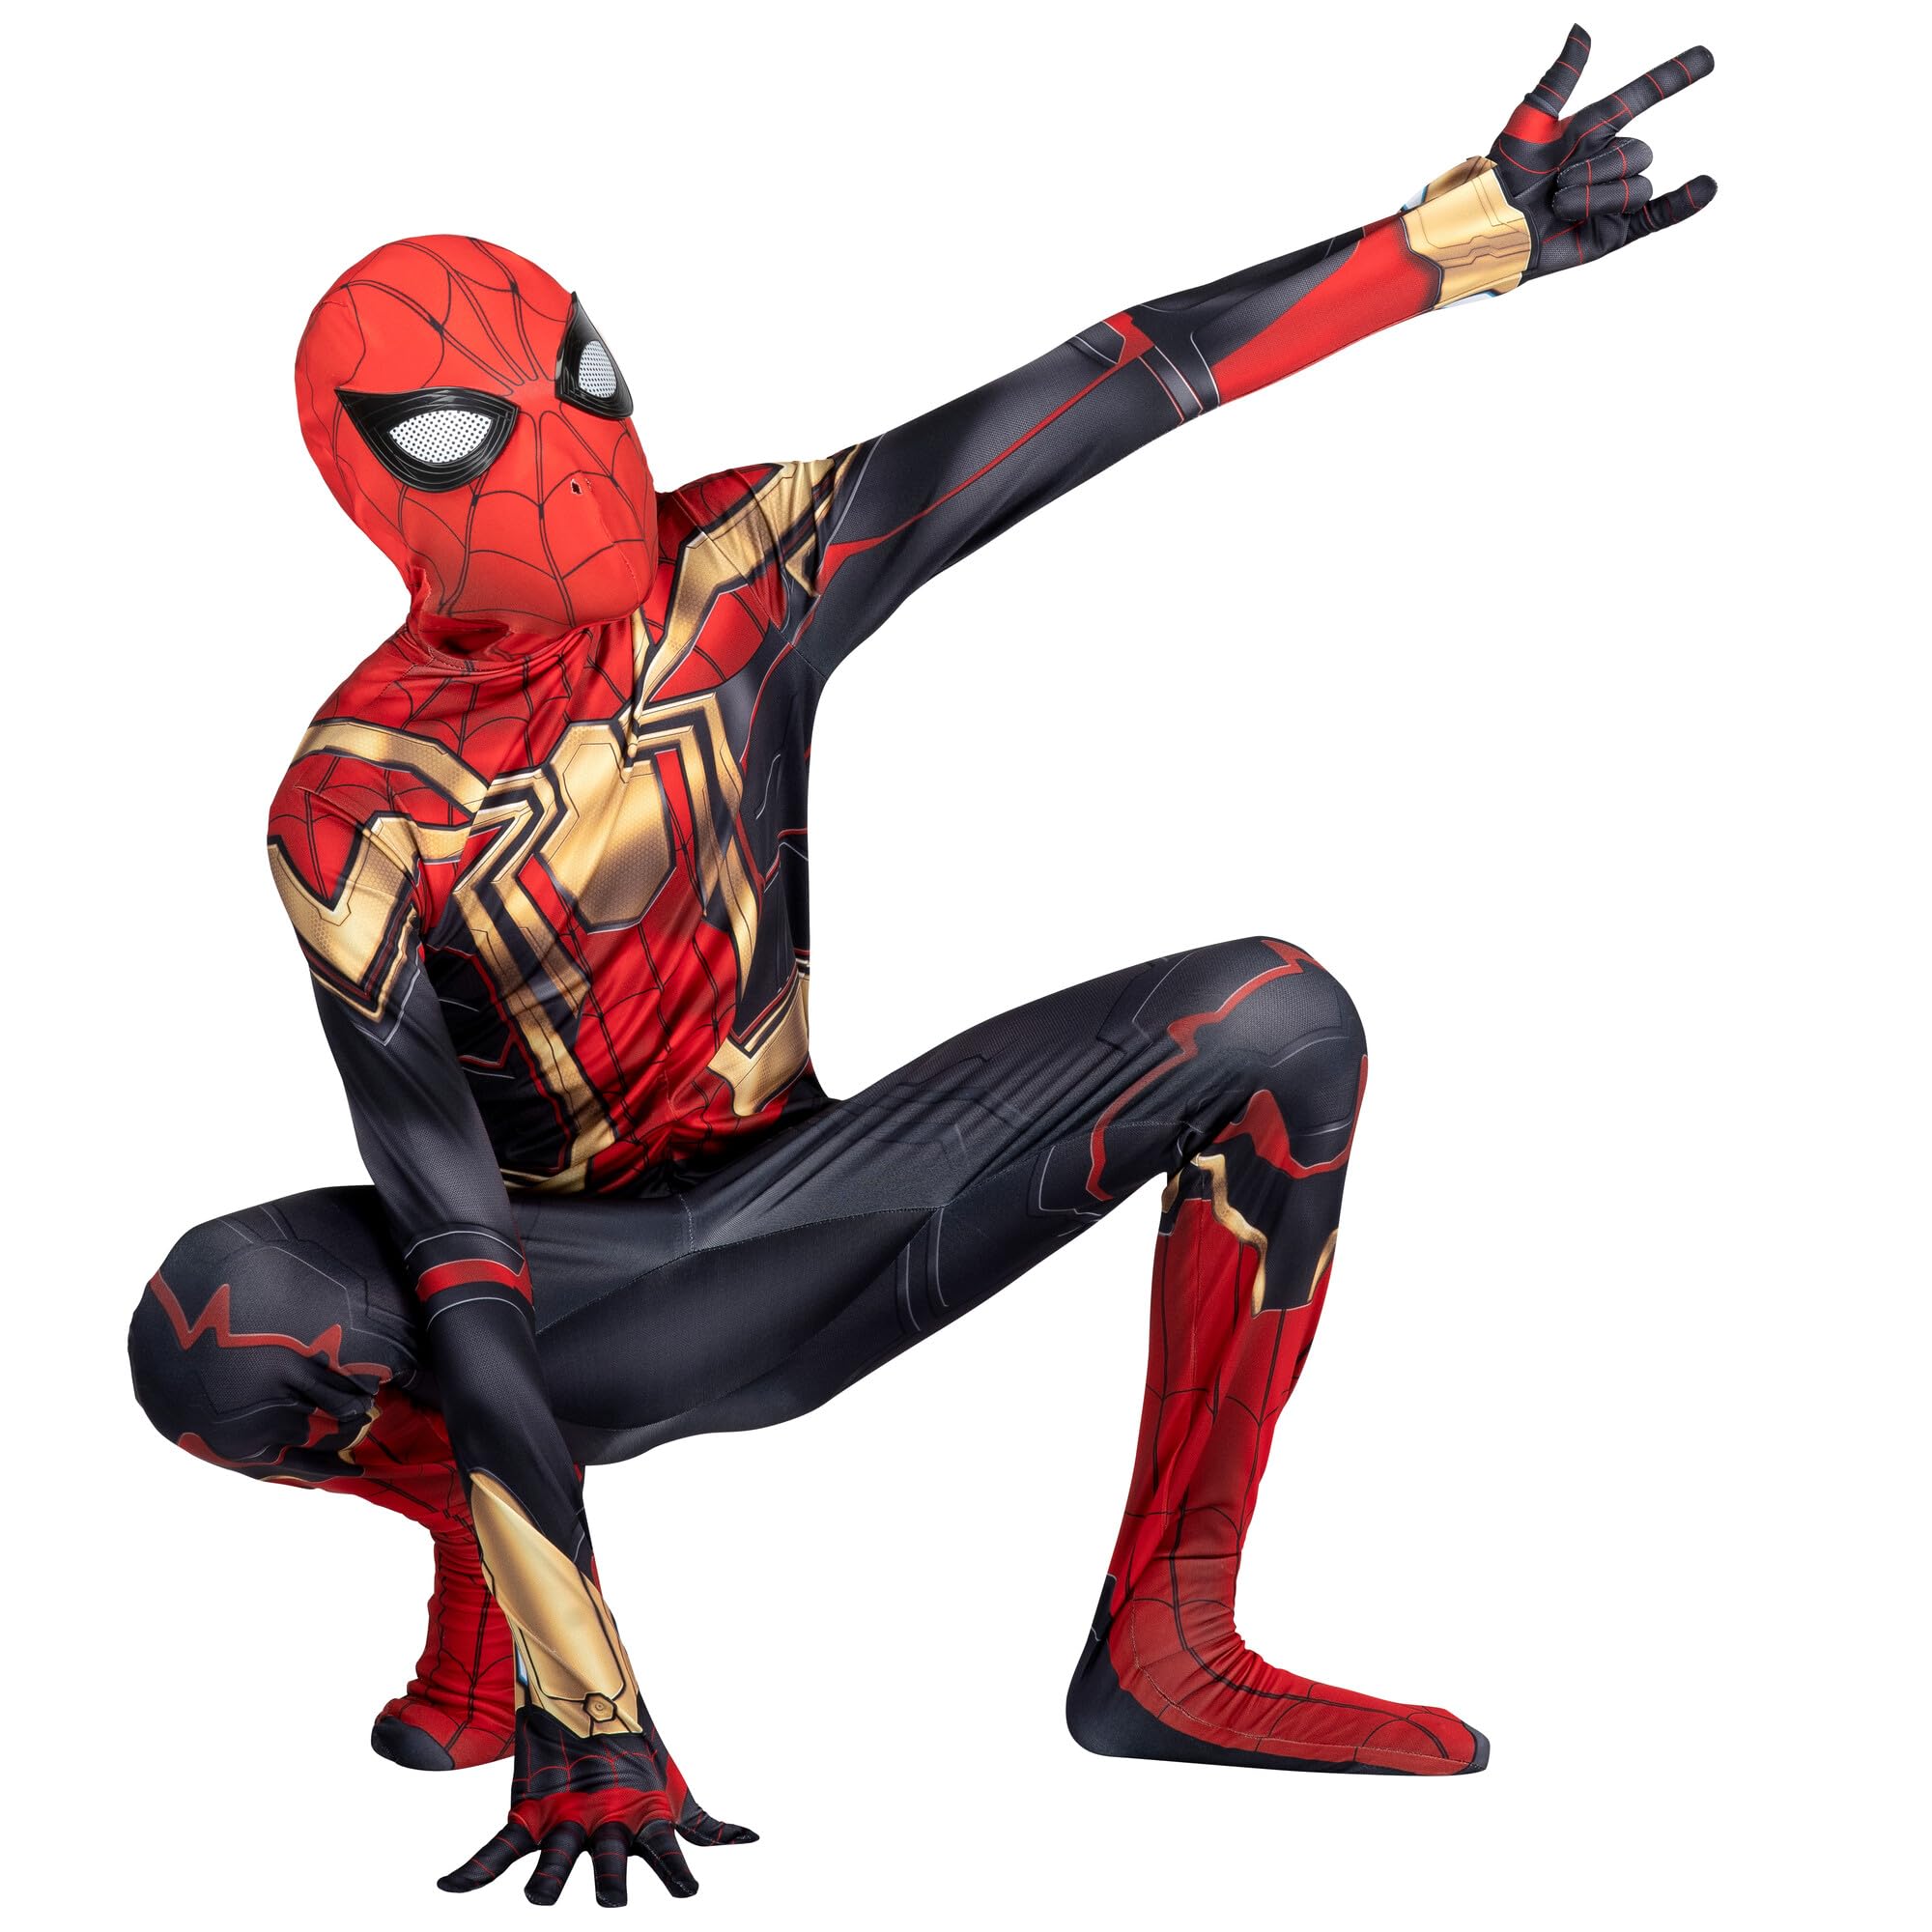 MARVEL Integrated Spider-Man Official Youth Deluxe Zentai Suit - Spandex Jumpsuit with Printed Design and Spandex Detachable Mask with Plastic Eyes